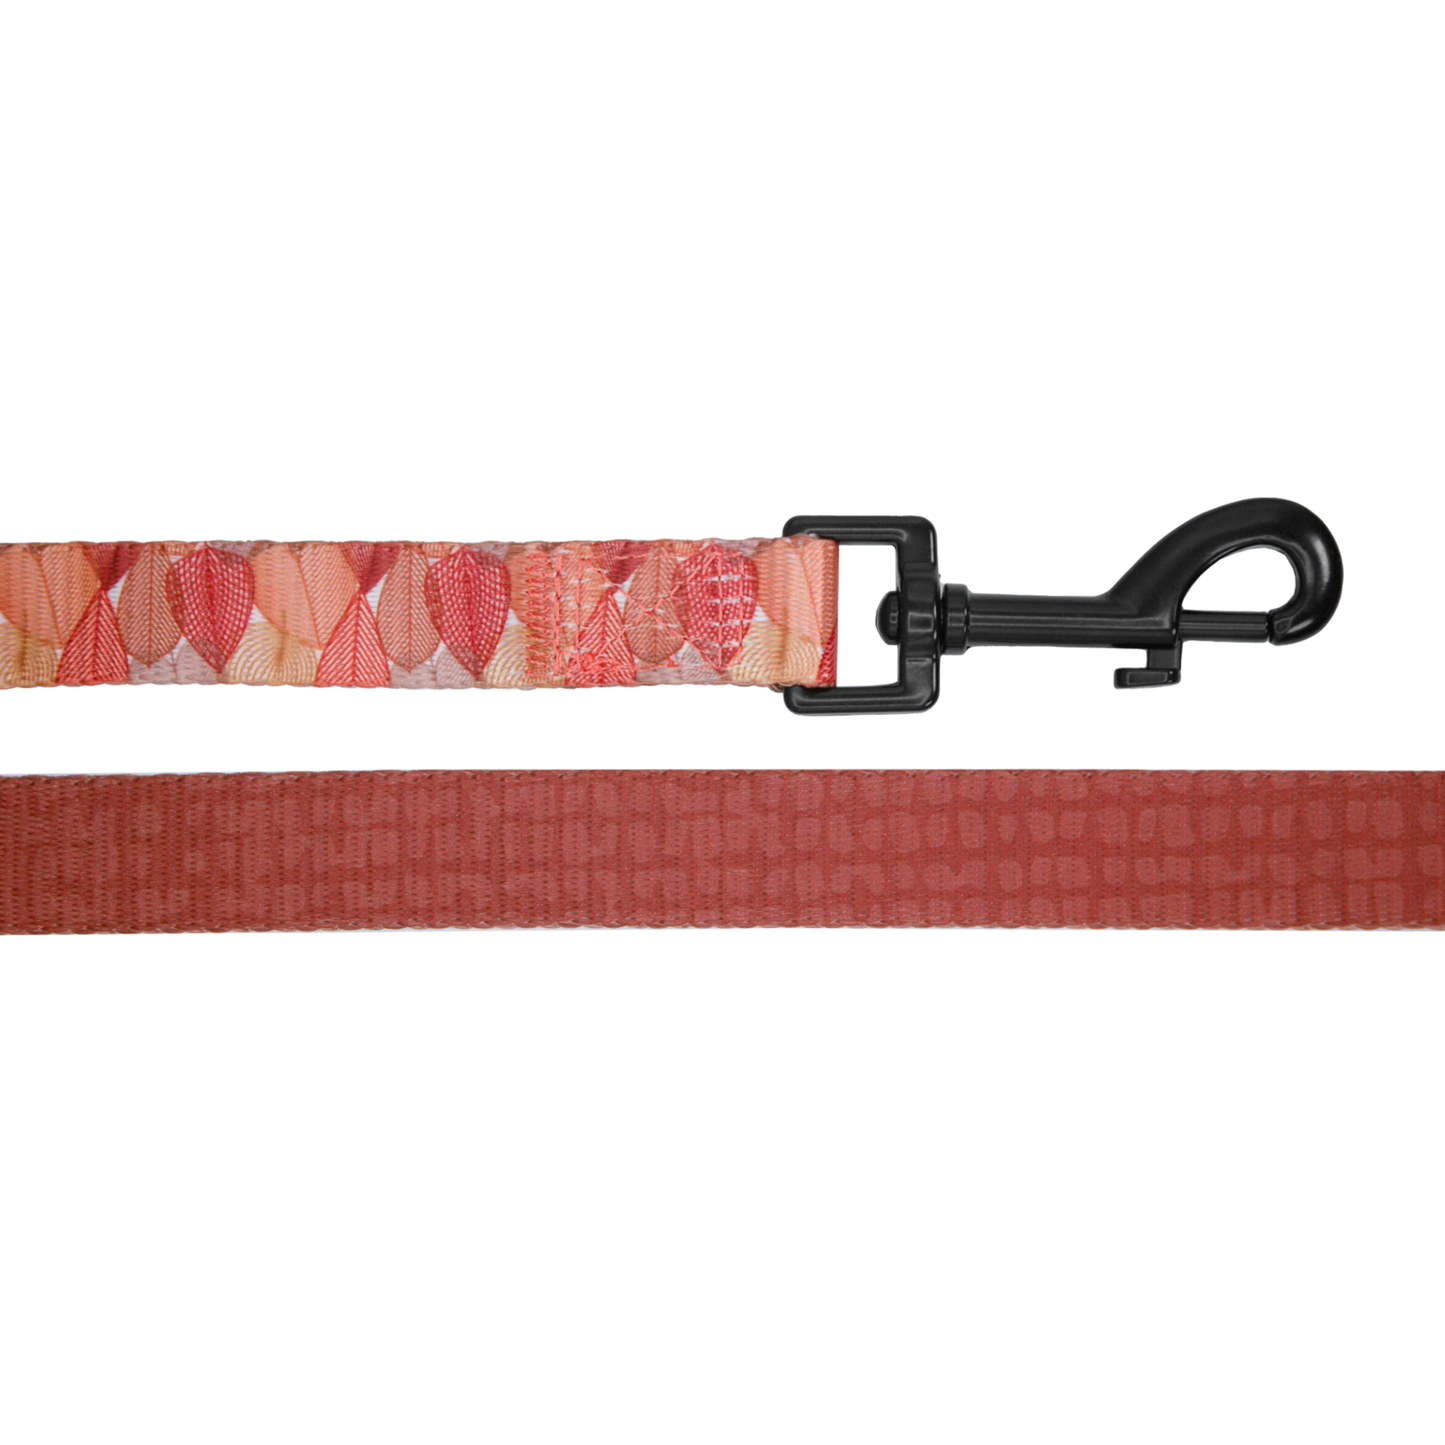 pata paw autumn crunch leash showing buckle and patterns